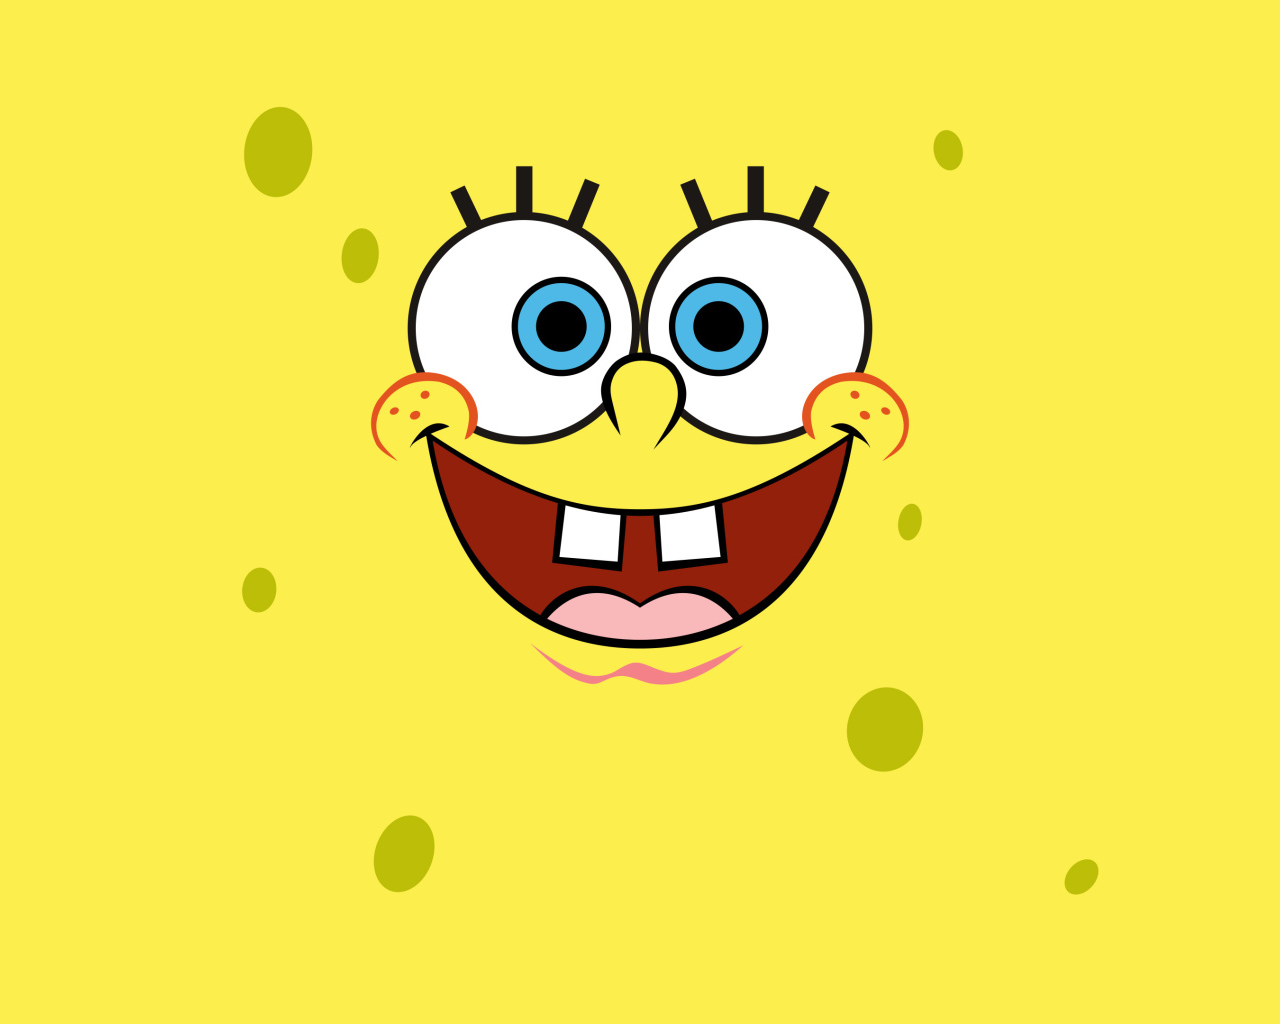 Spongebob face on a yellow background close-up